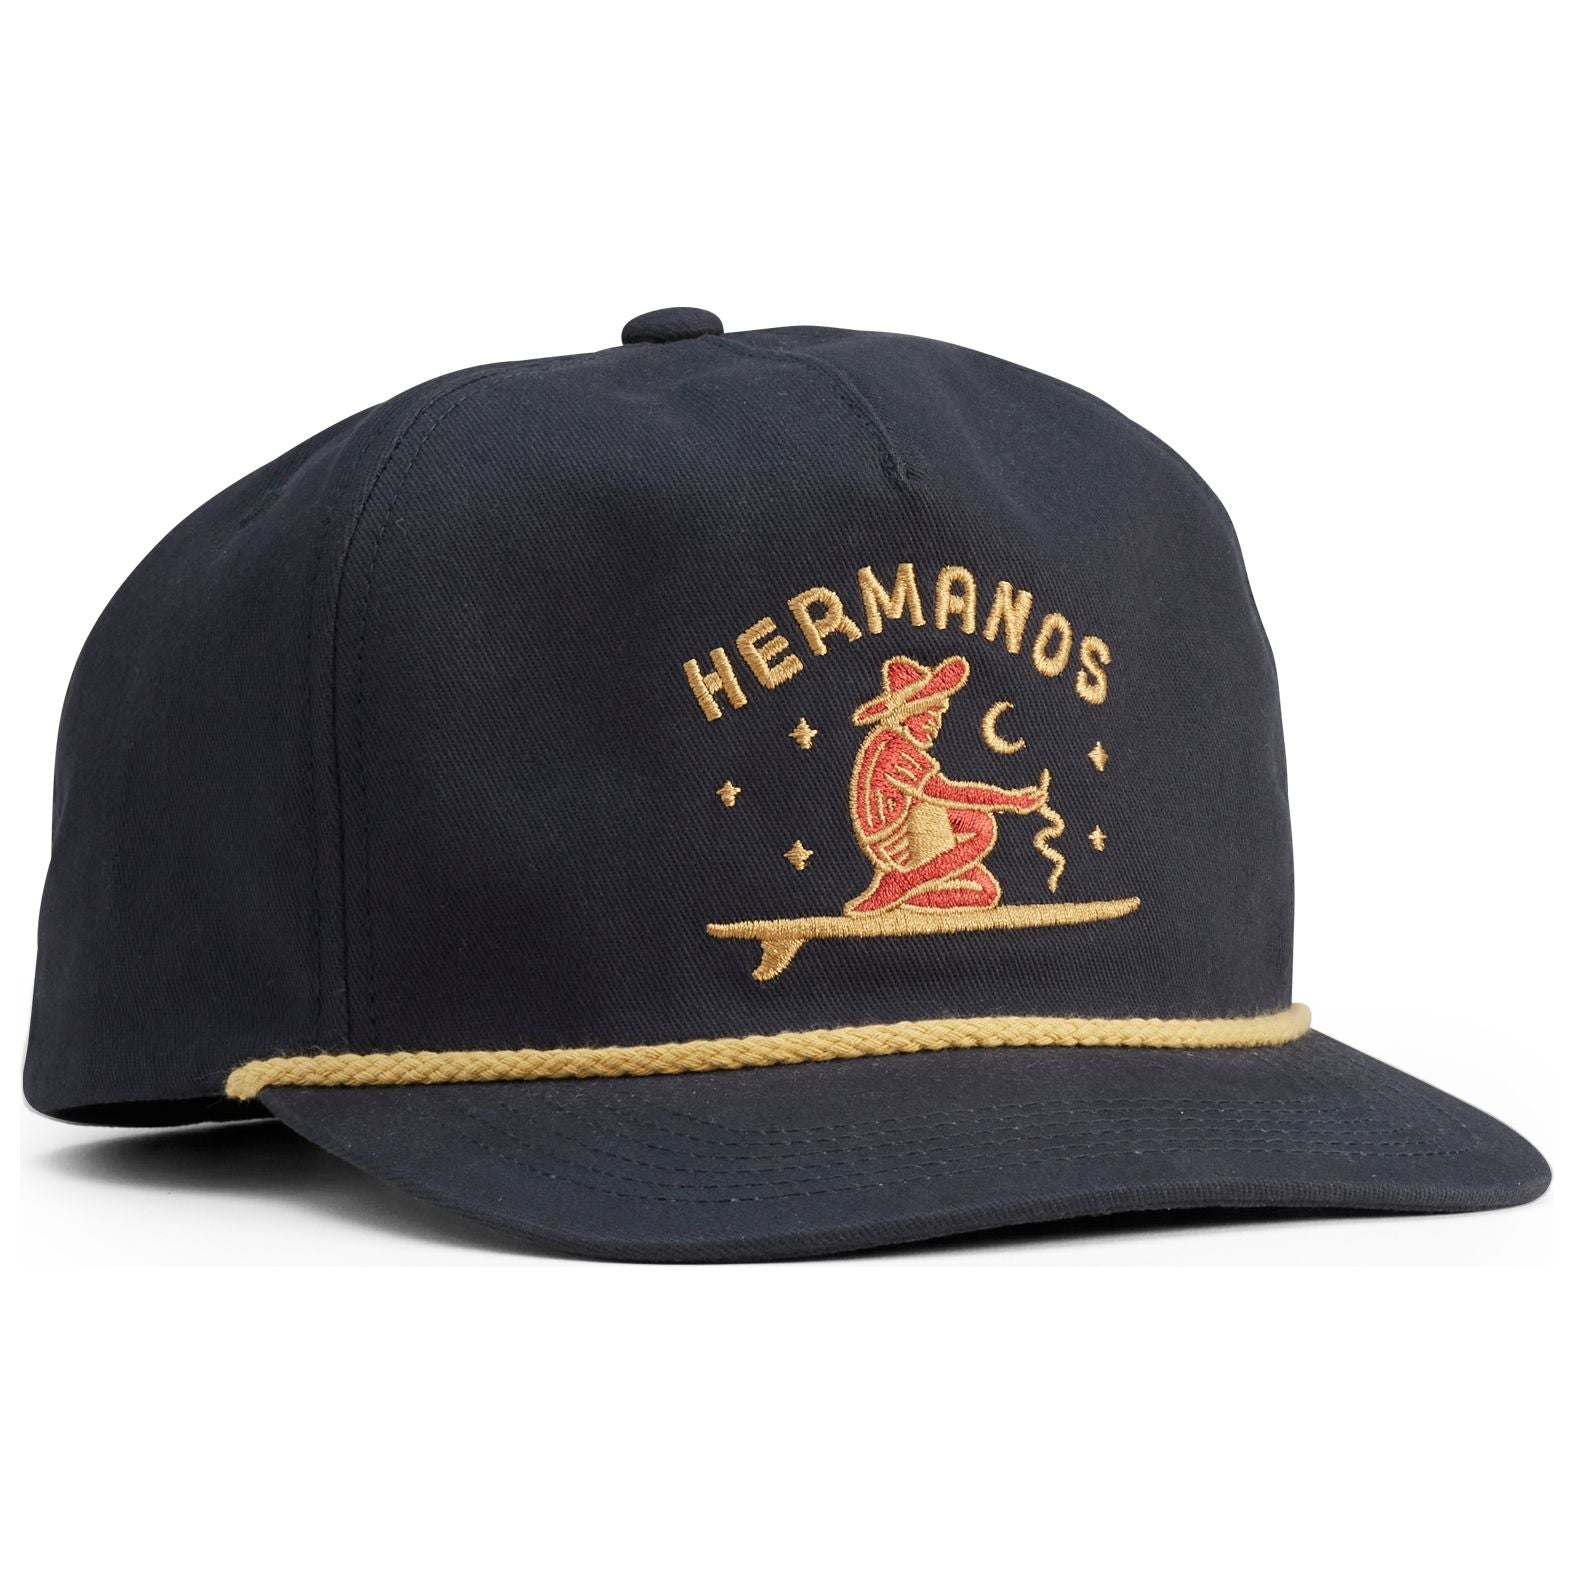 Howler Brothers Unstructured Snapback Hats: Ocean Offerings : Navy Twill Image 01